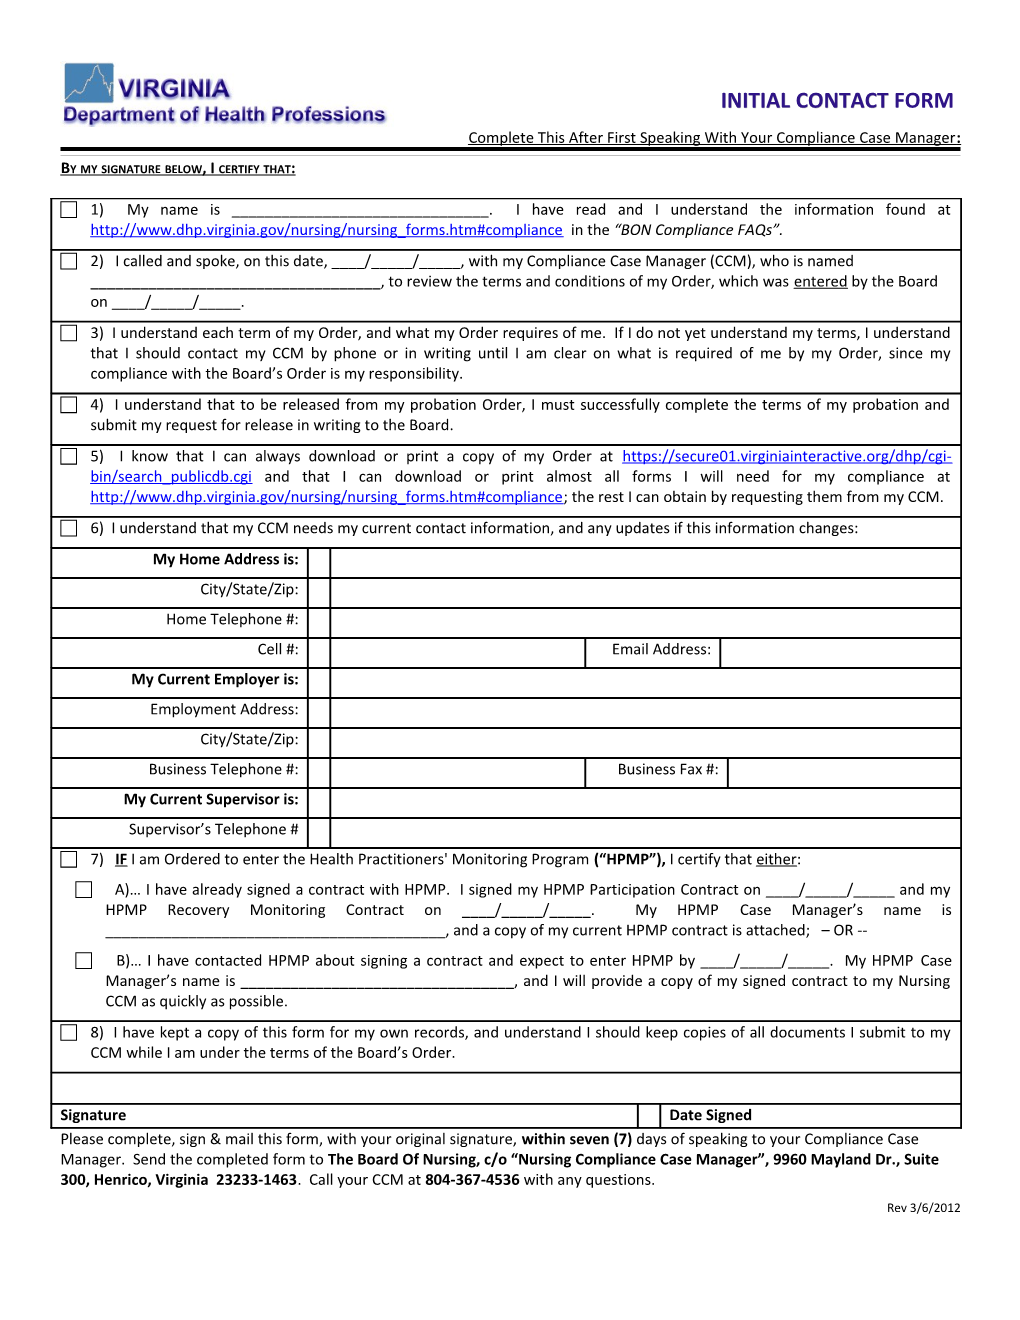 Form #1: Complete This Form After Speaking with Your Compliance Case Manager